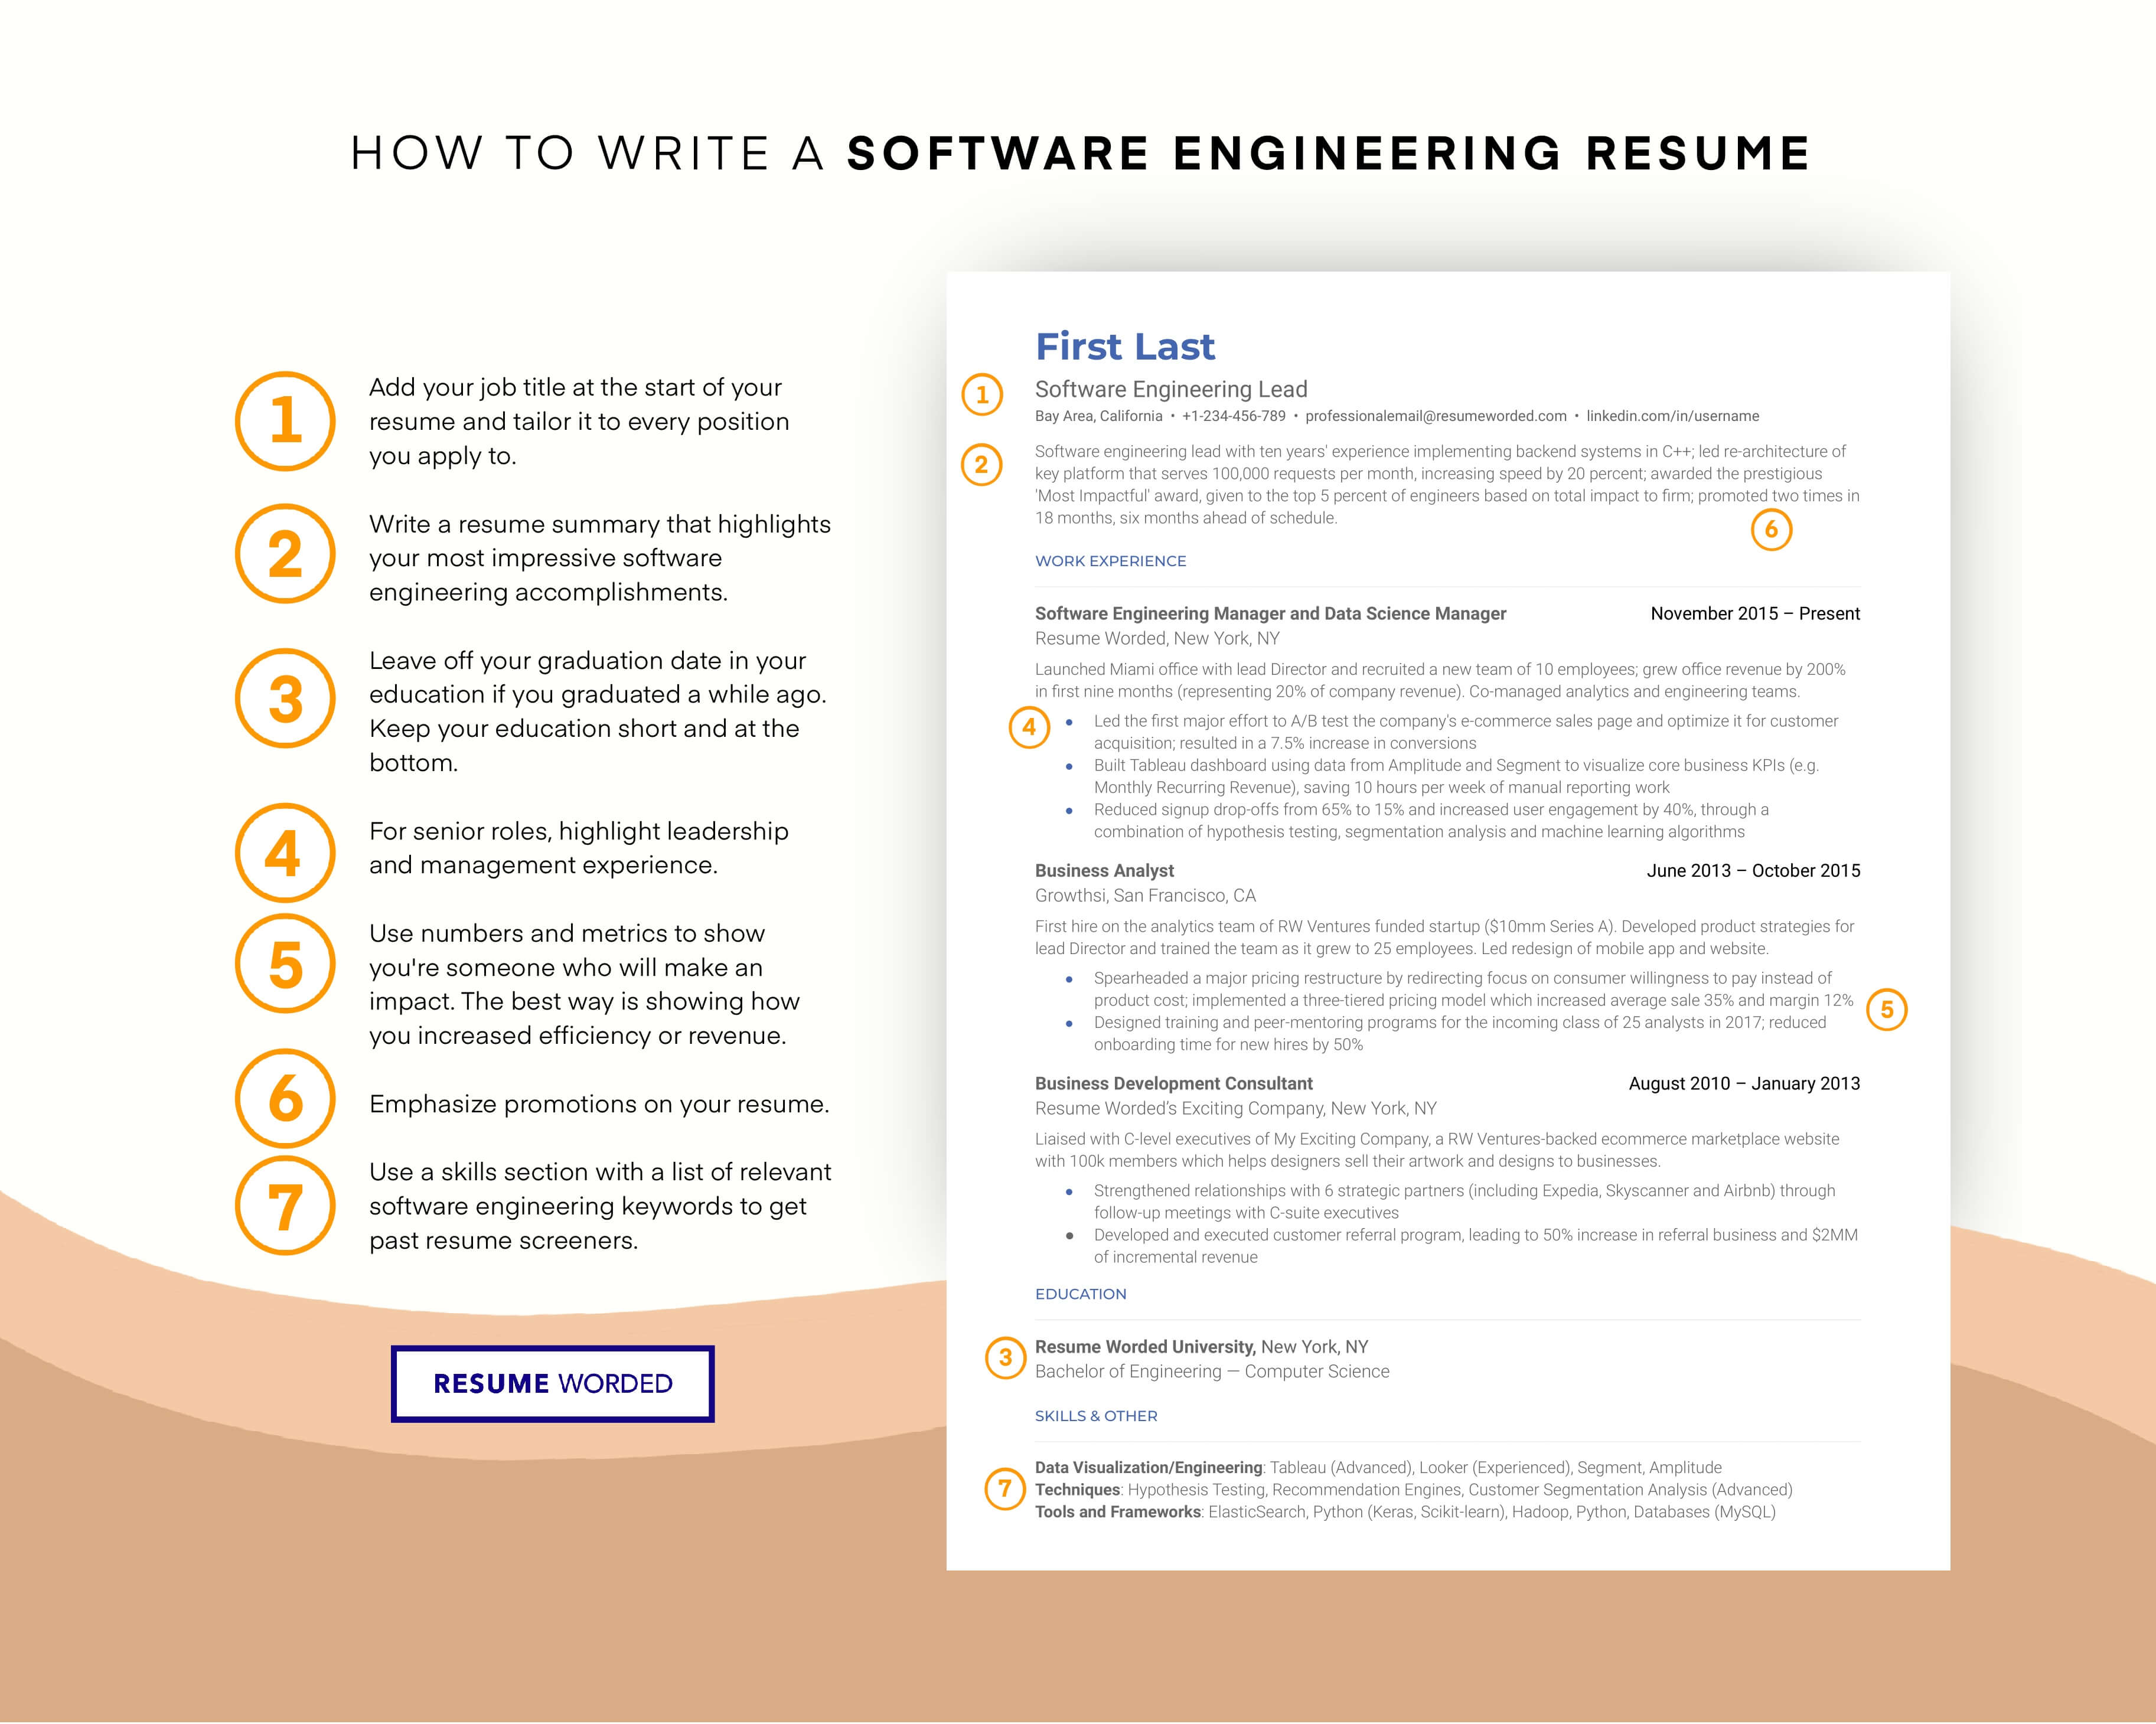 Include specific software proficiency - Manufacturing Engineer CV